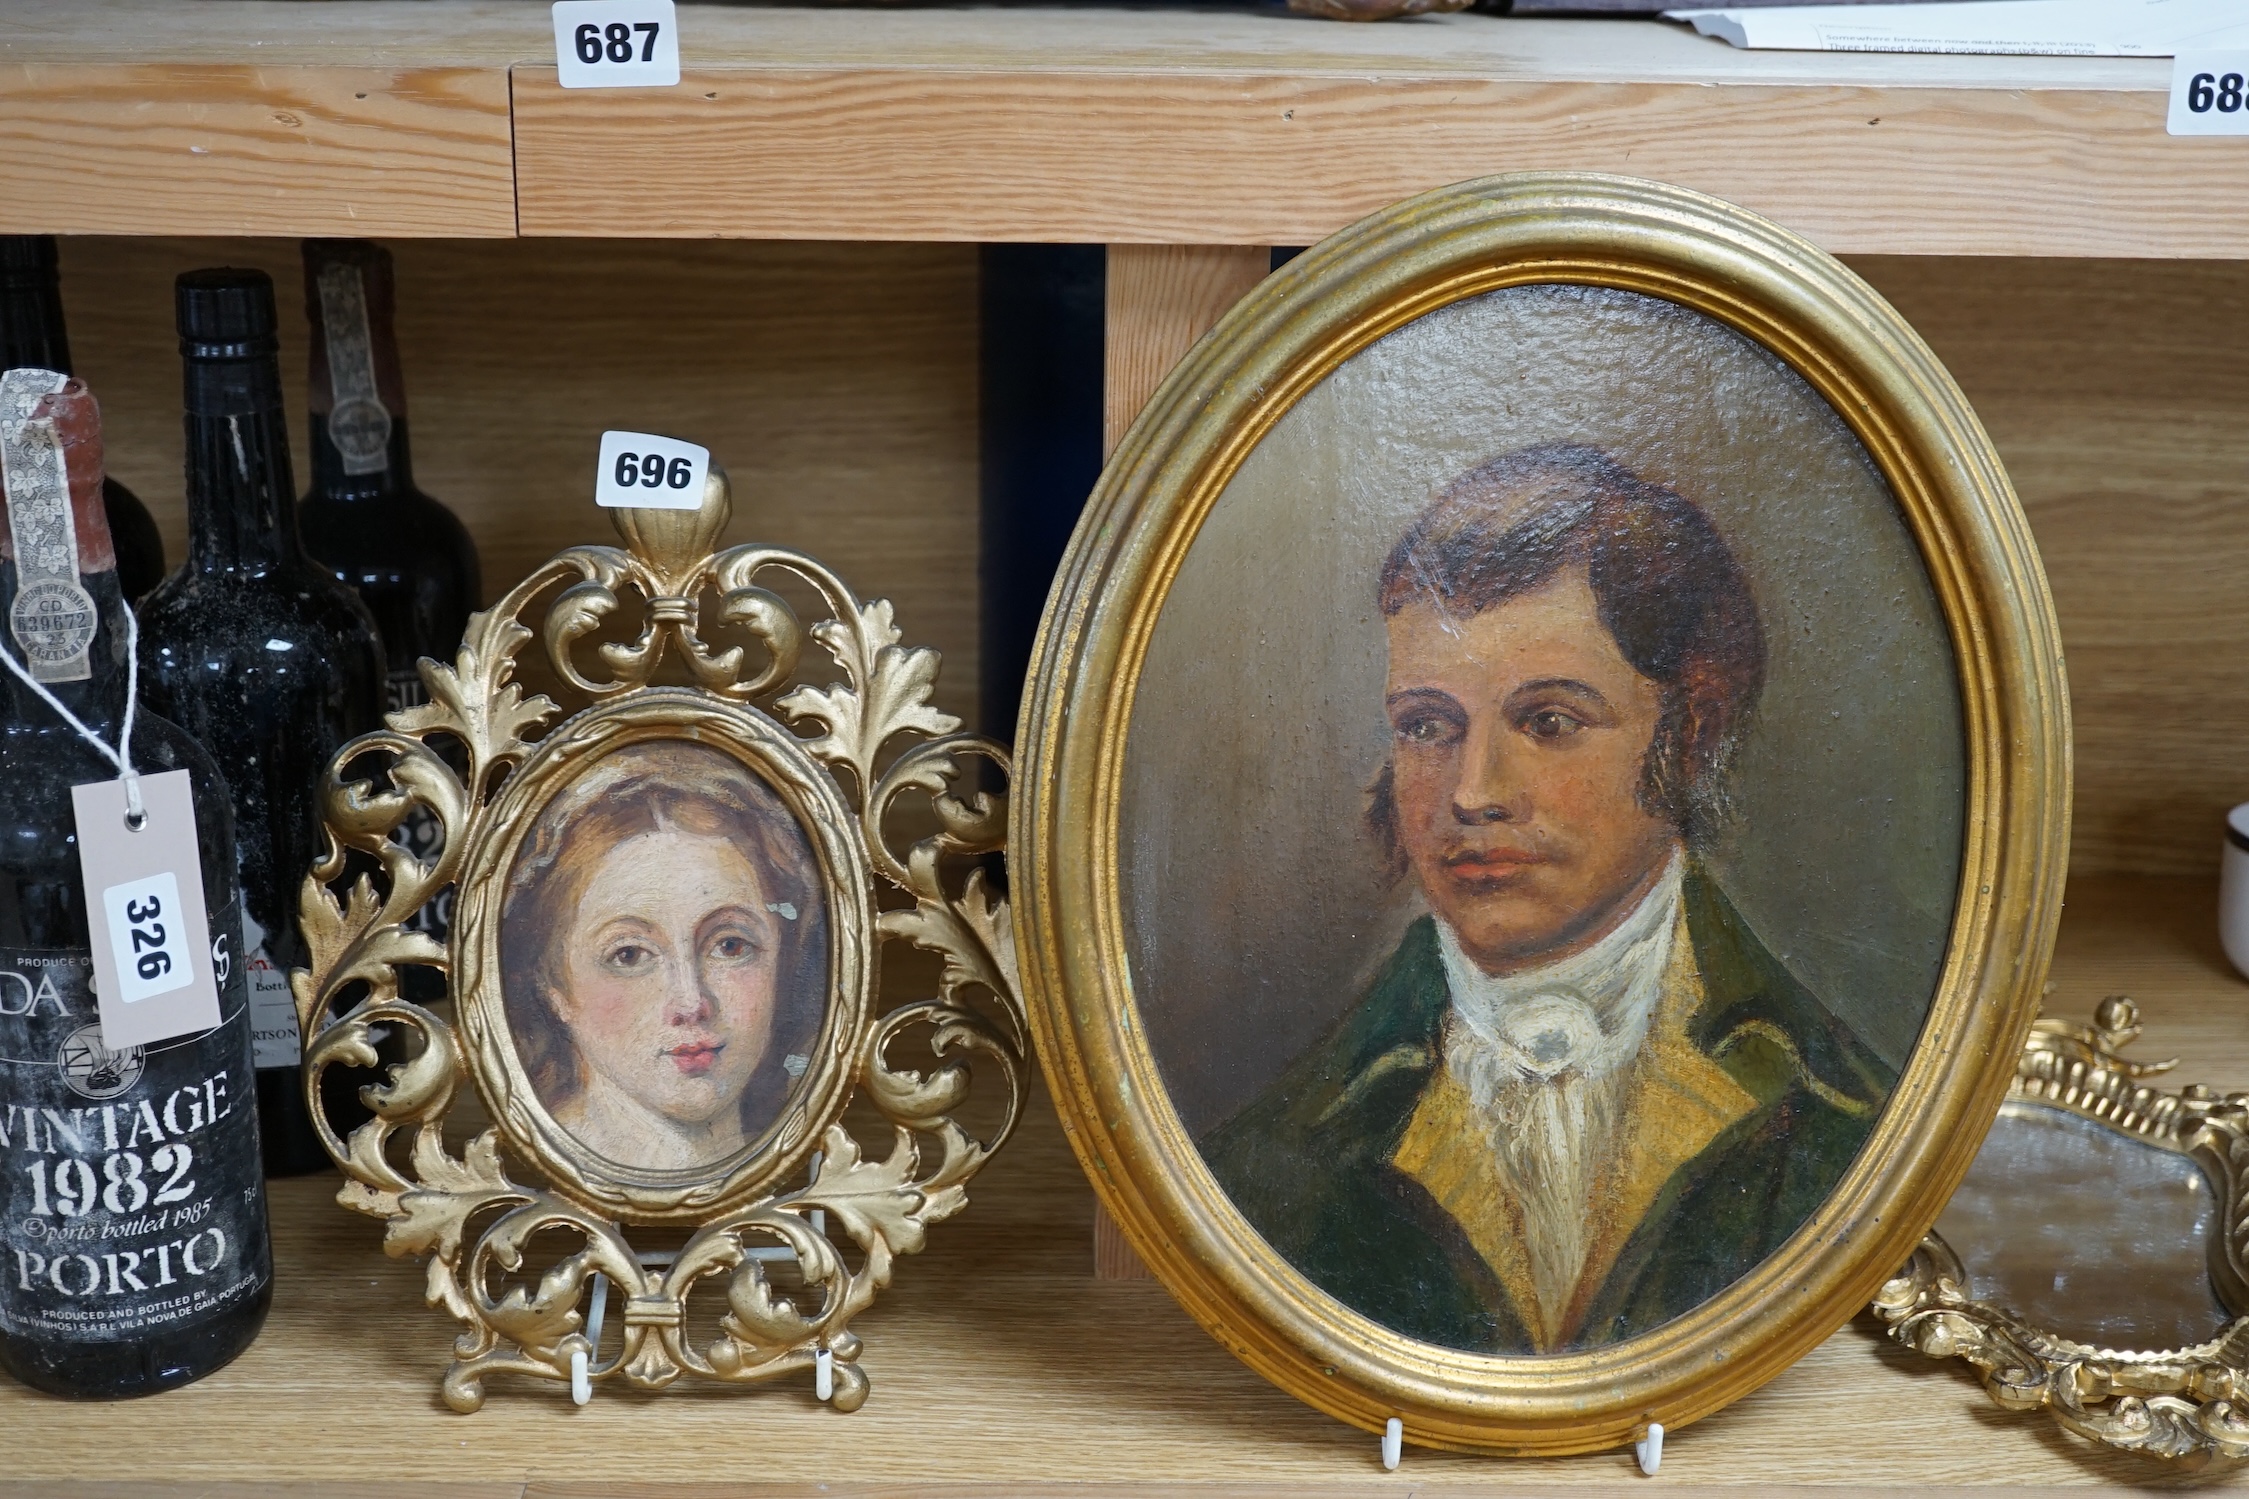 Early 19th century, oval oil on board, Portrait of a gentleman, together with another portrait of a lady, housed in a gilt metal frame, and an Italian rococo style gilt framed wall mirror, largest 28 x 22cm. Condition -